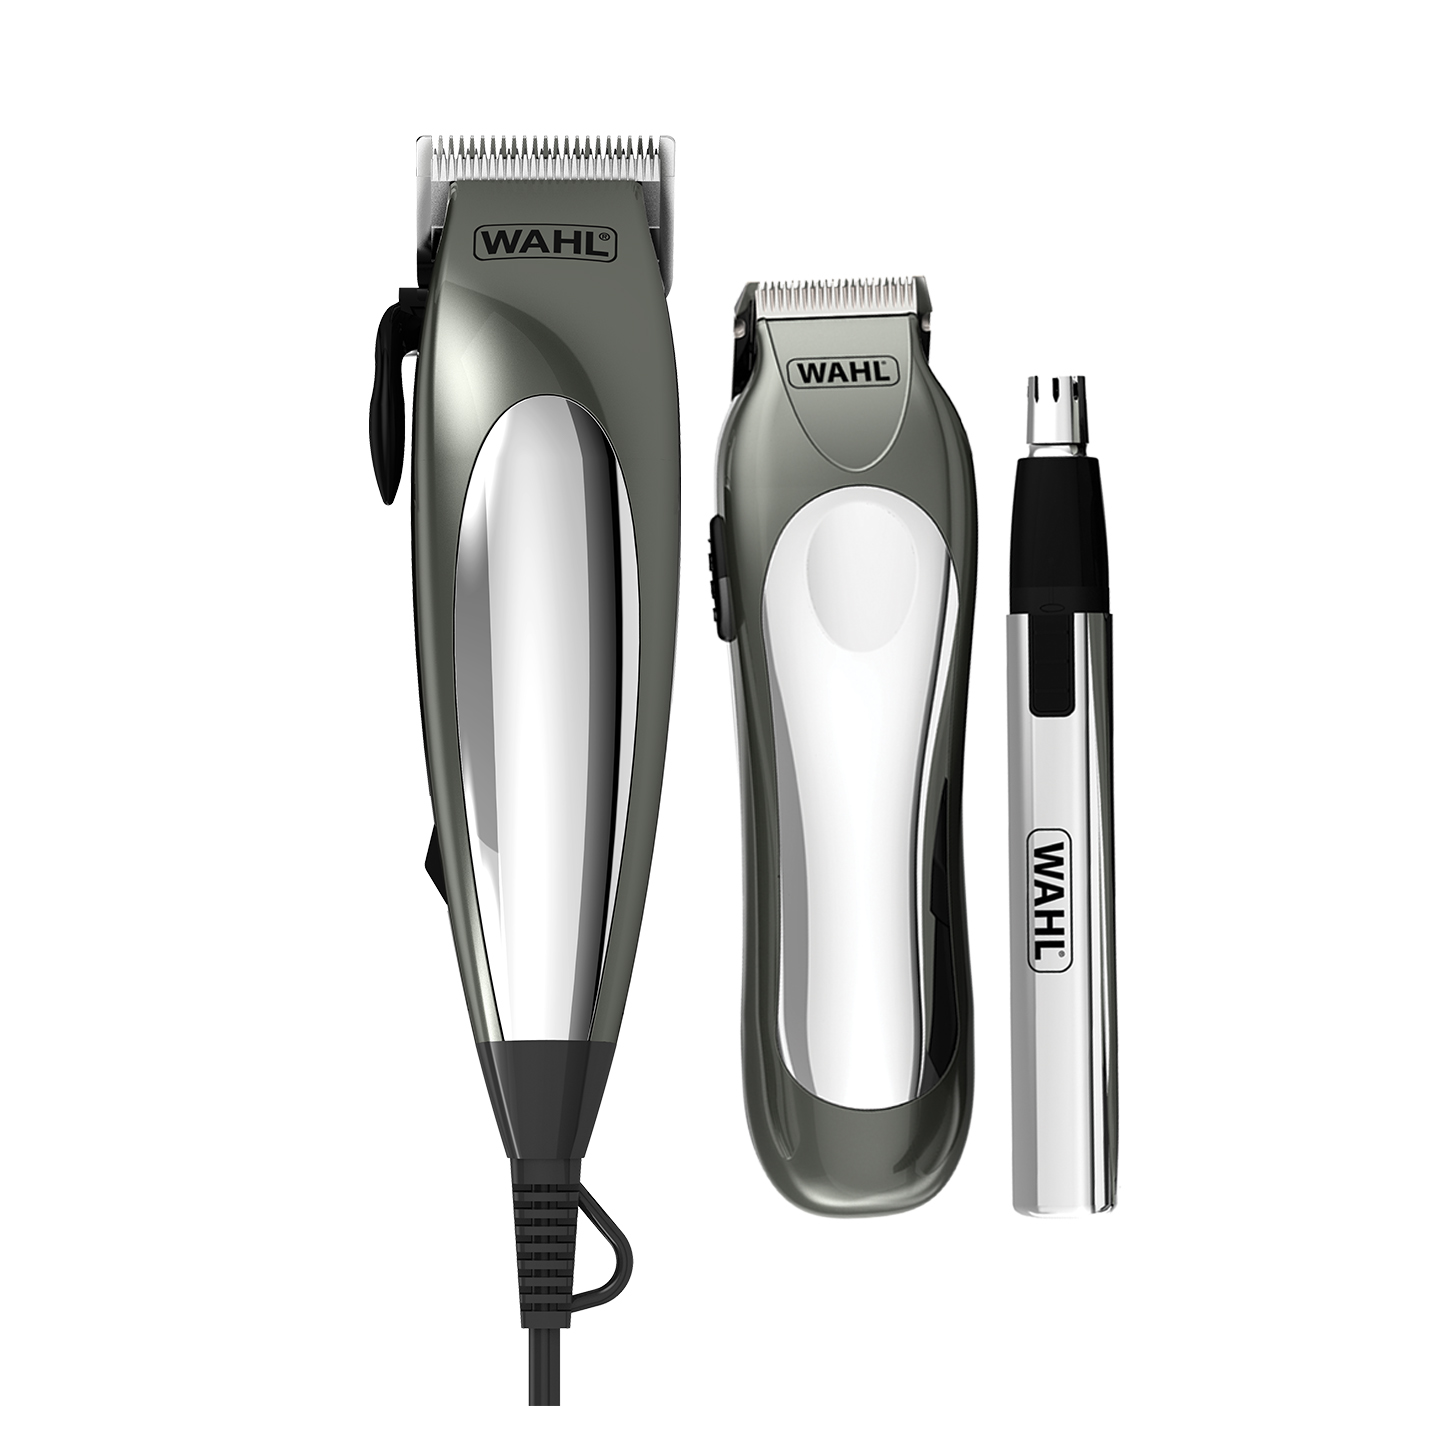 Clipper & Trimmer Grooming Set | Home Haircutting | Wahl UK